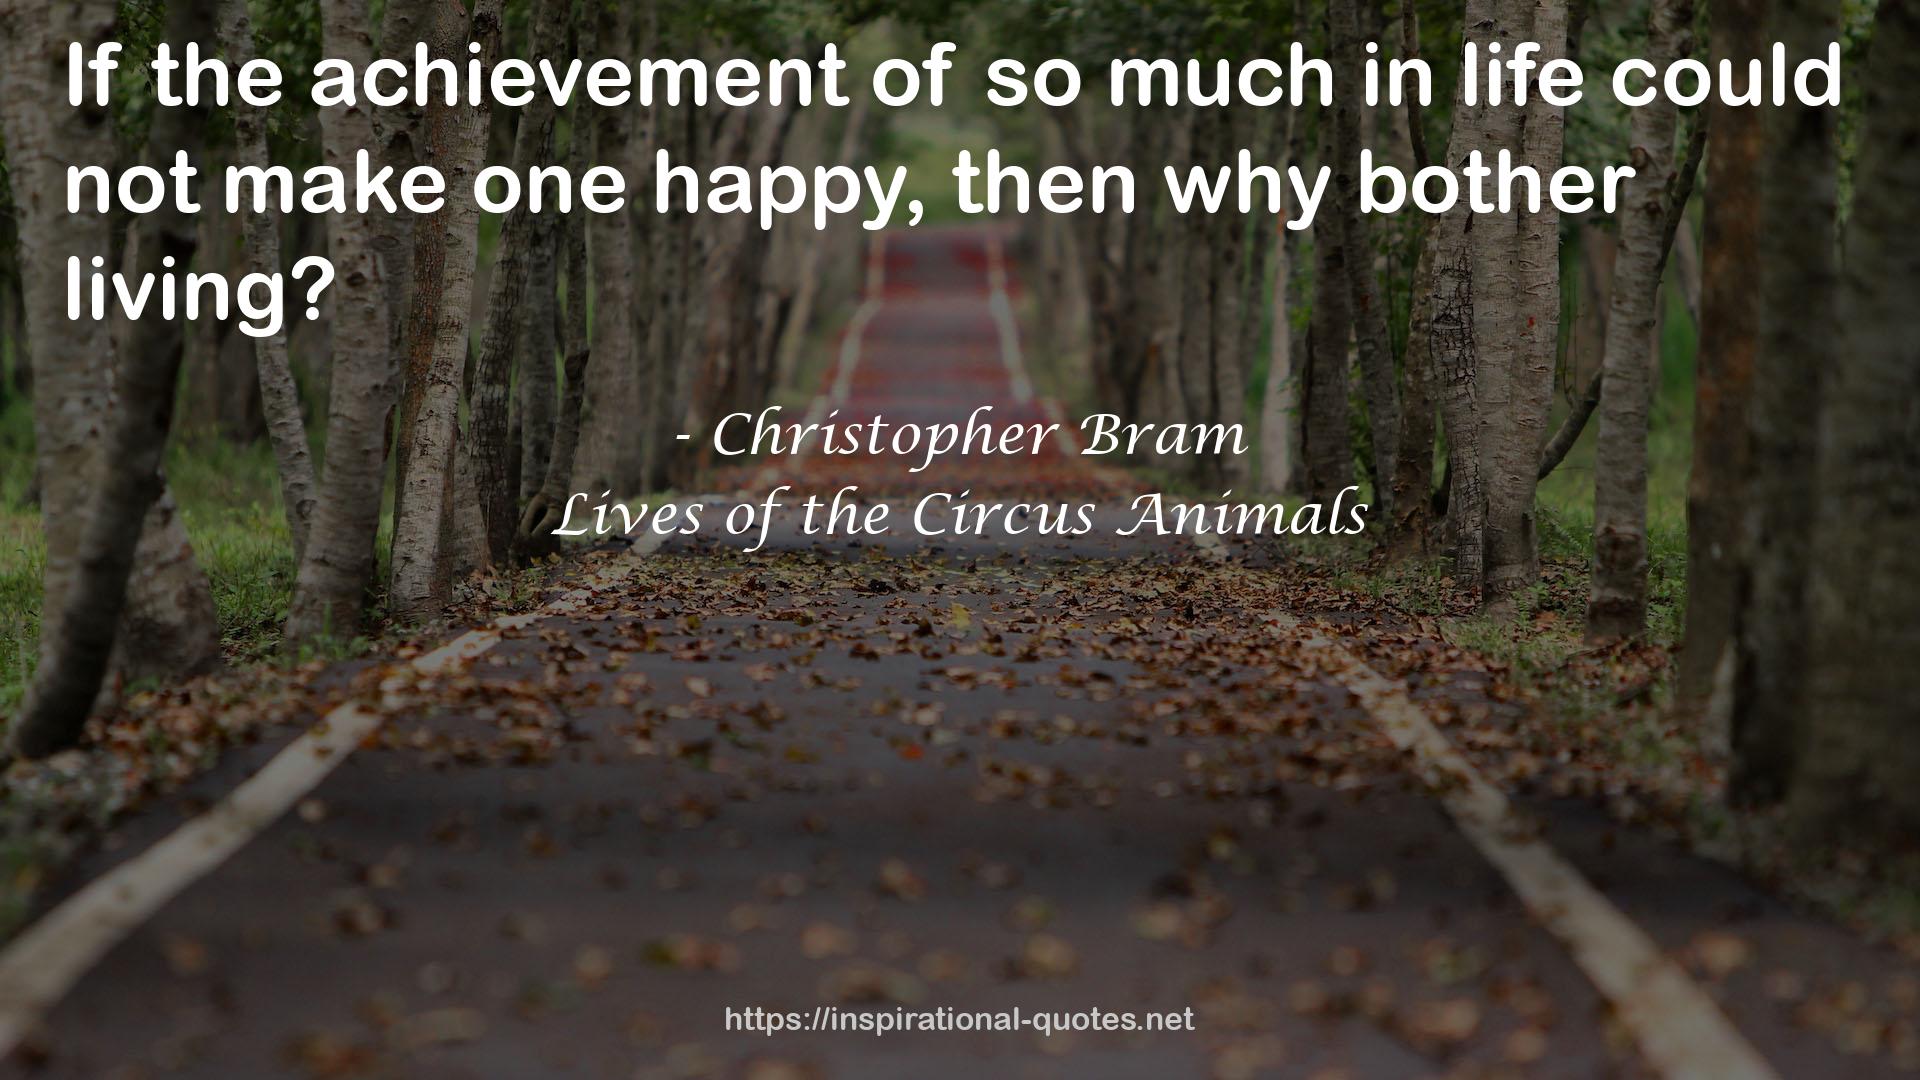 Lives of the Circus Animals QUOTES